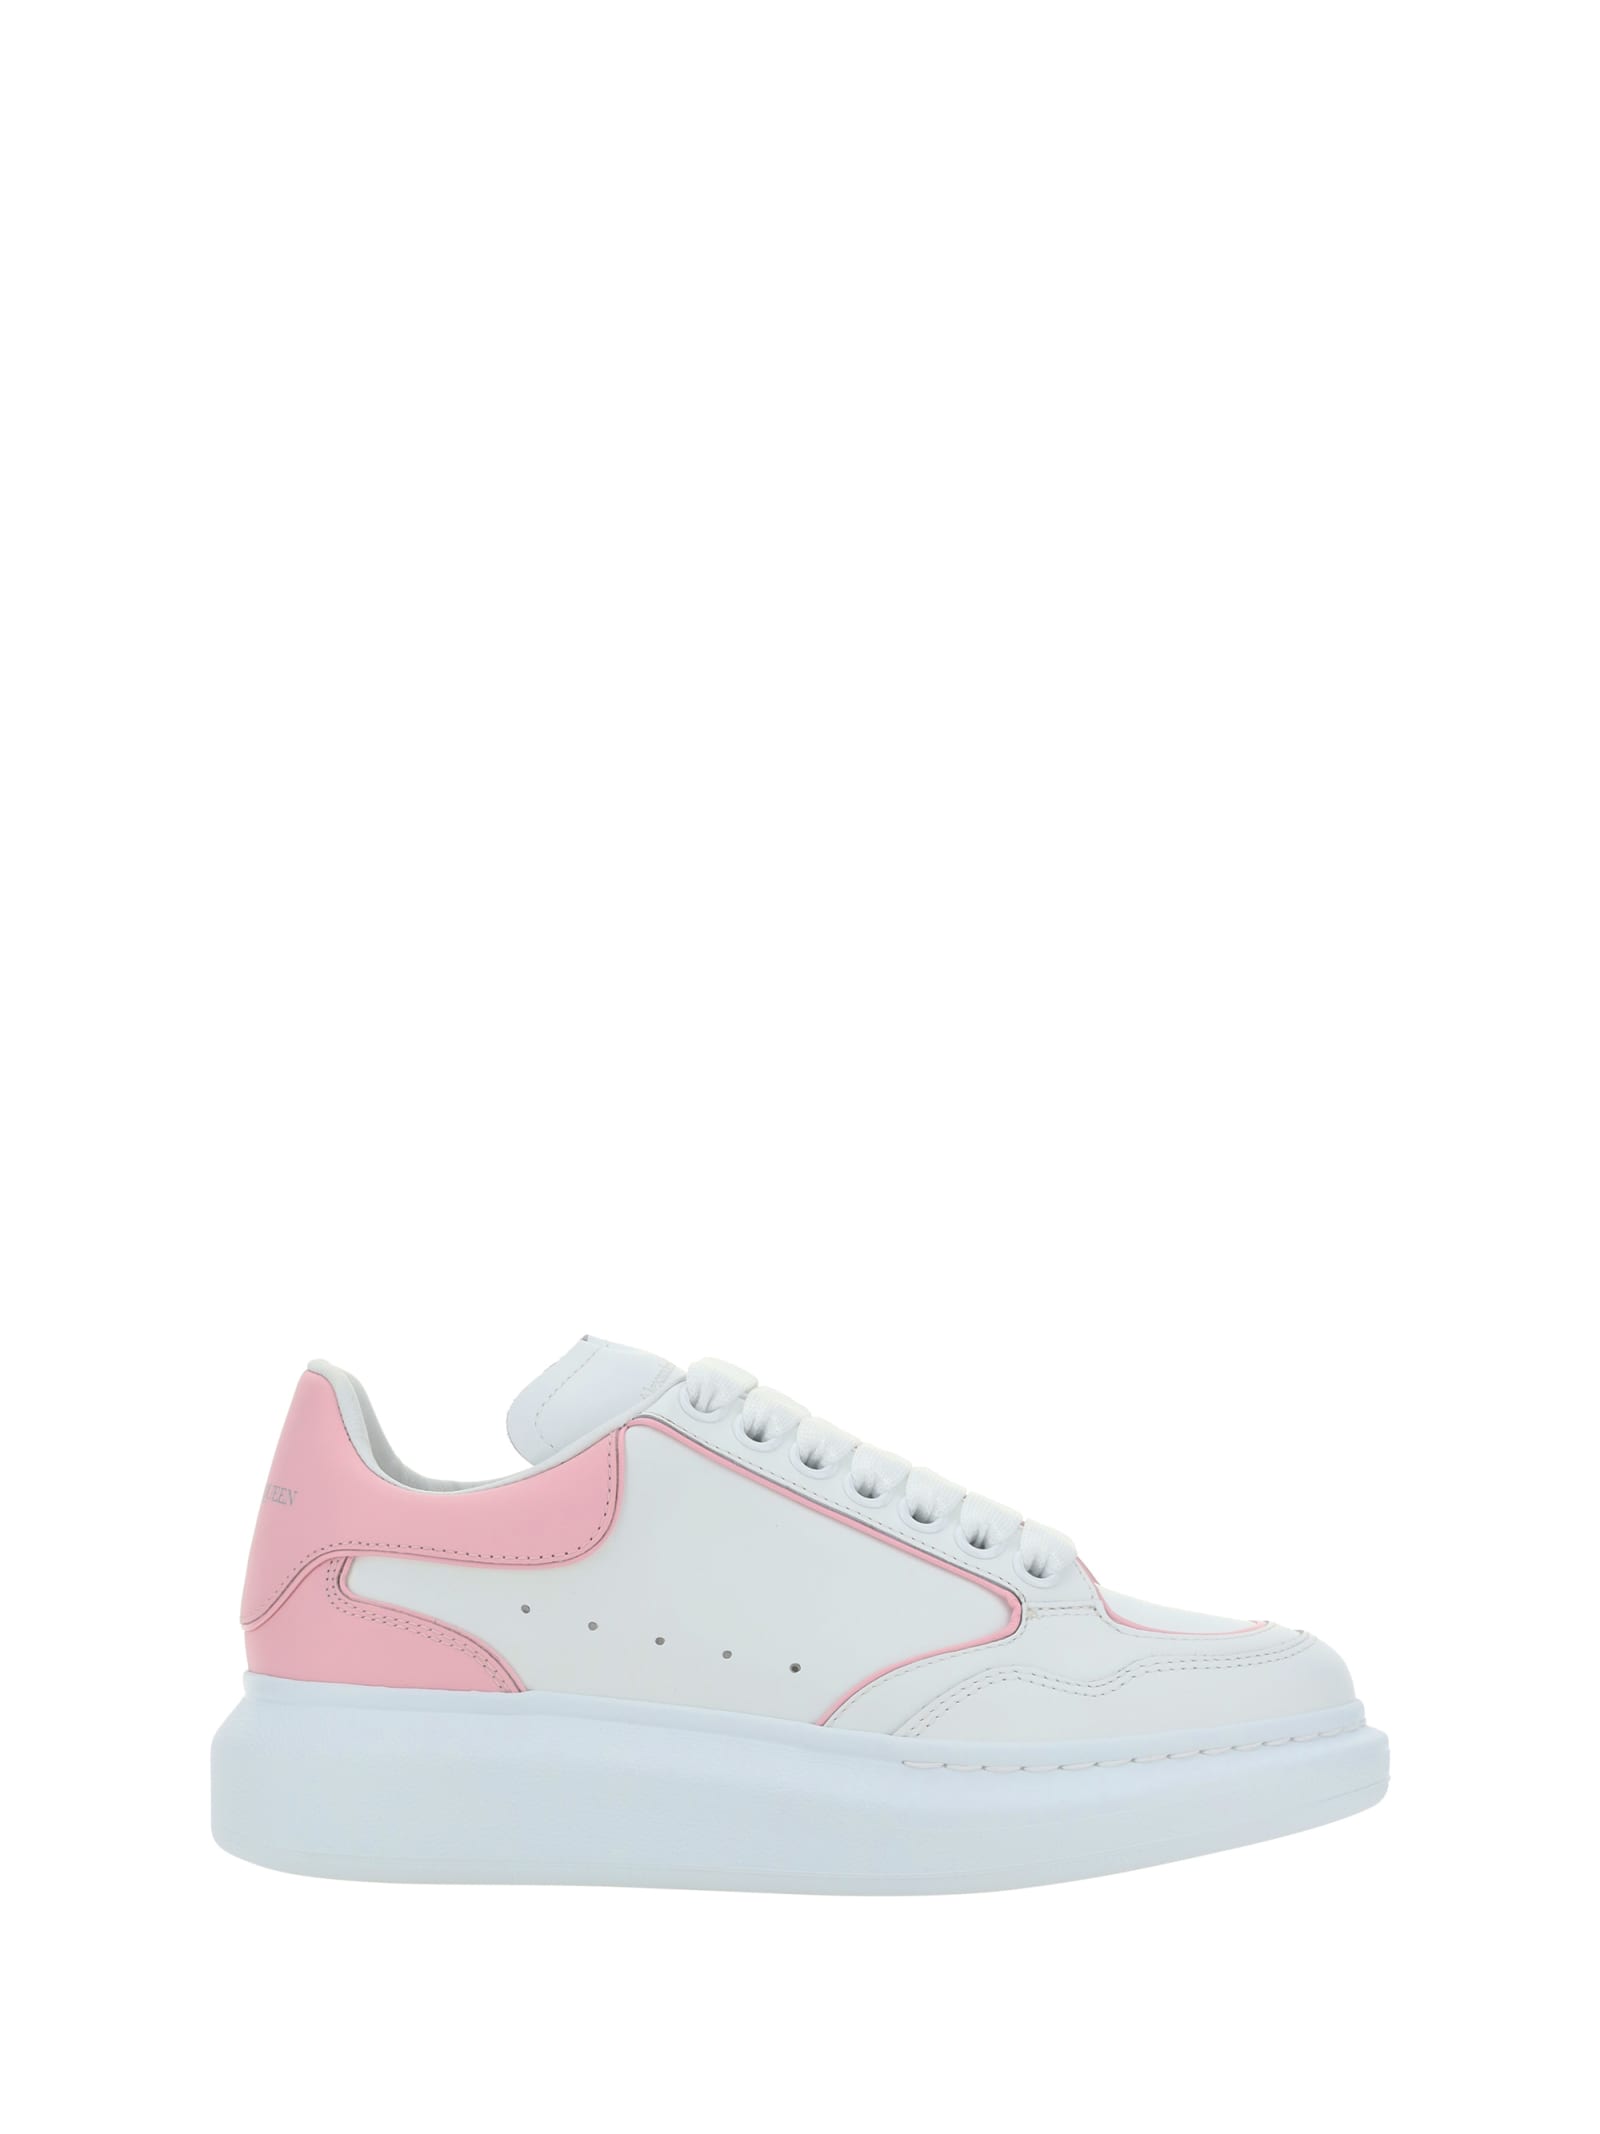 Alexander Mcqueen Trainers In White/pale Pink